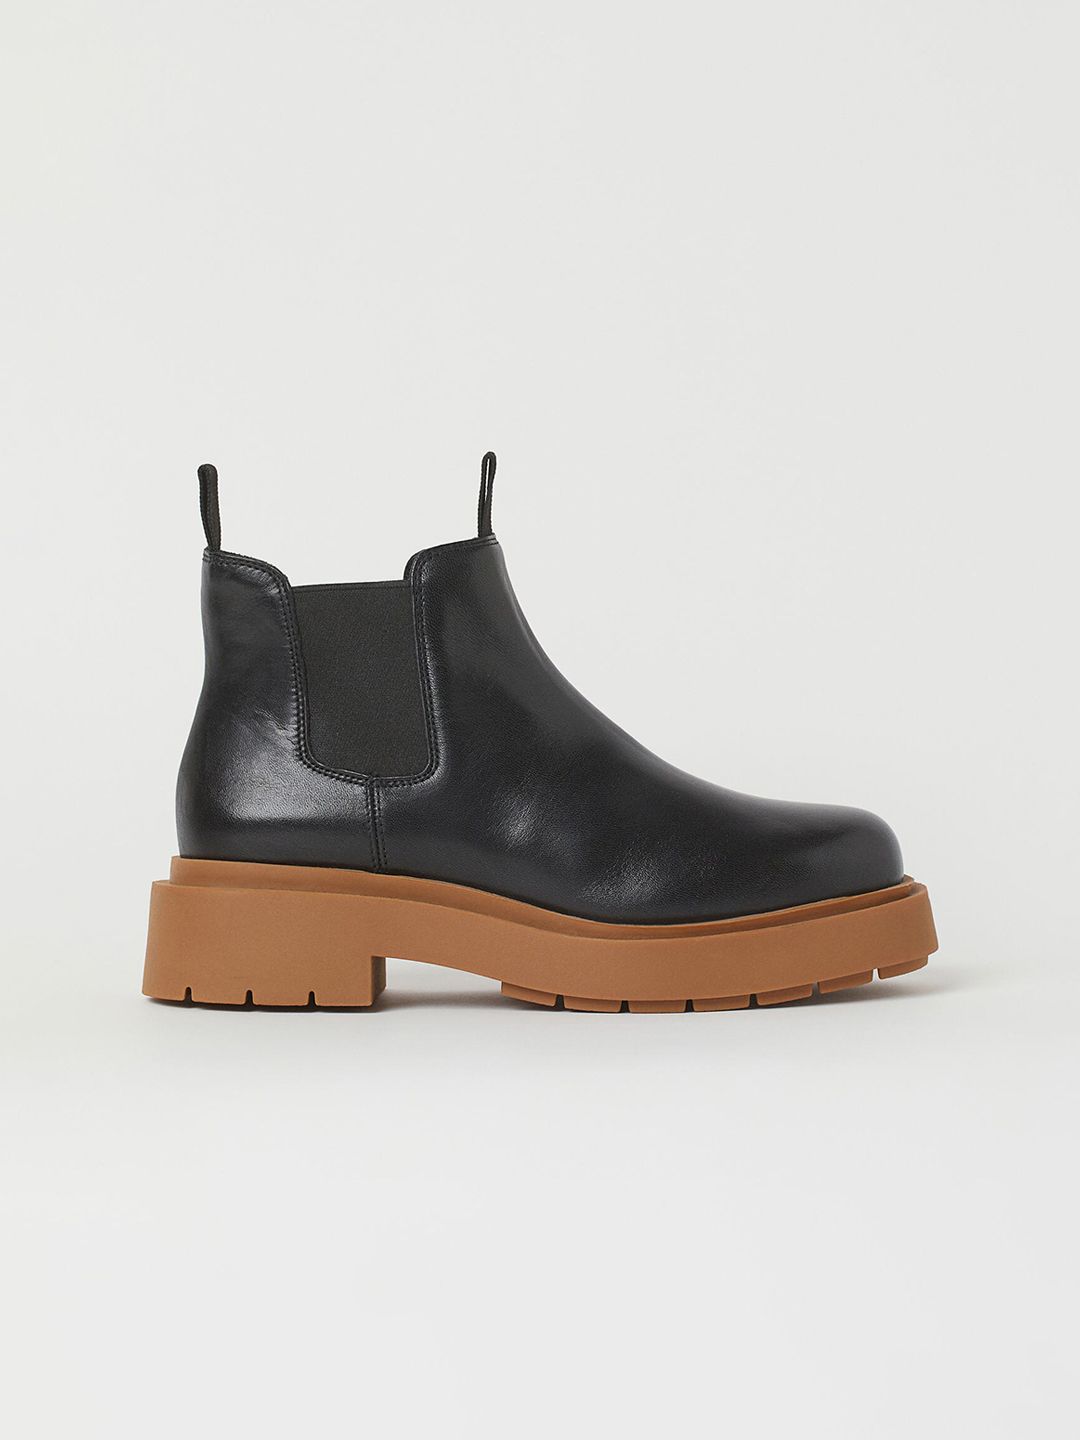 H&M Black Solid Leather Chelsea Boots Price in India